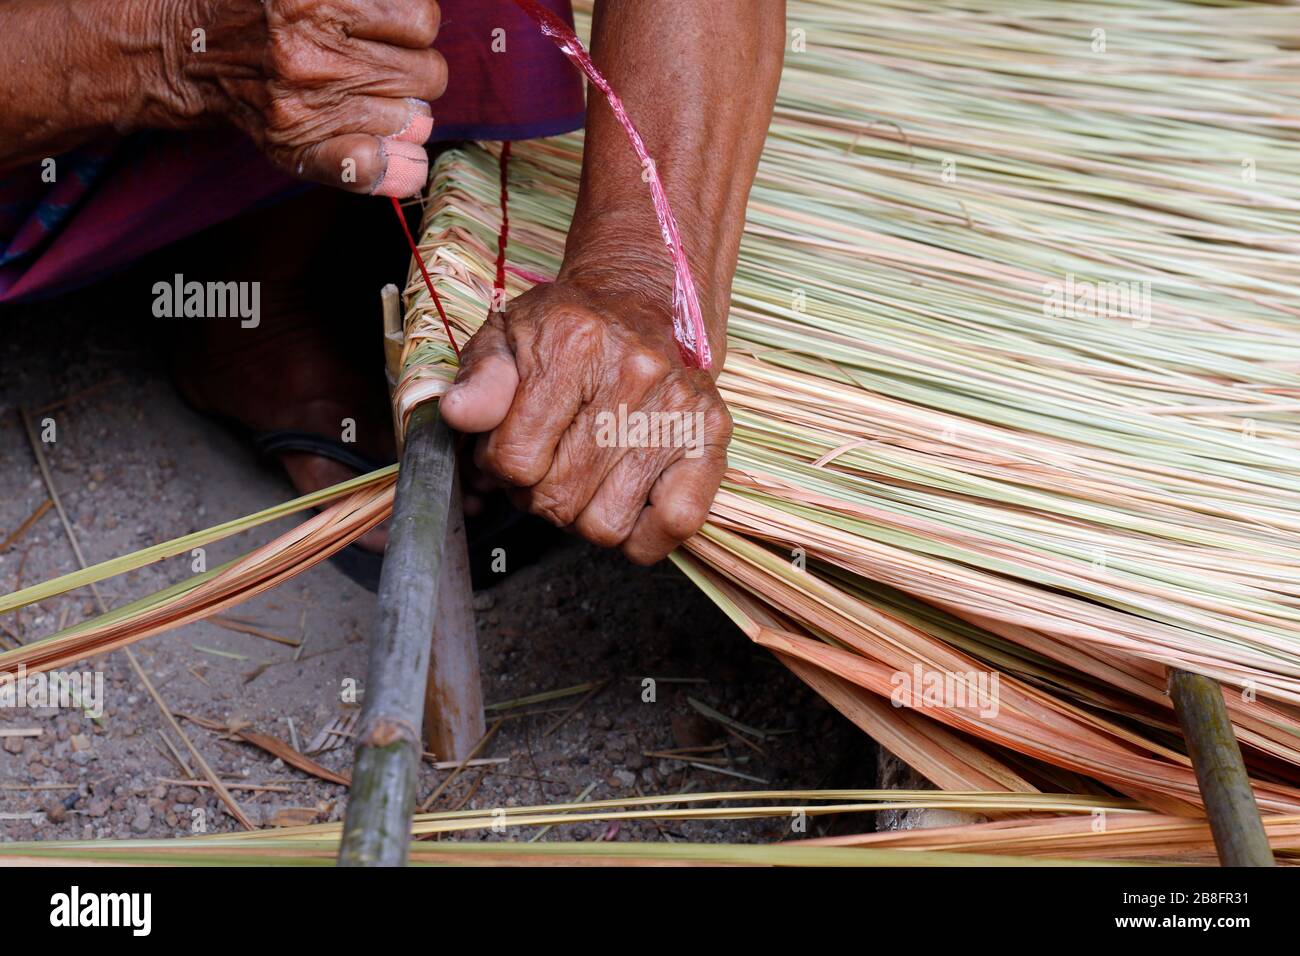 picture shows how to make a panel vetiver for hut roof, handwork crafts ...